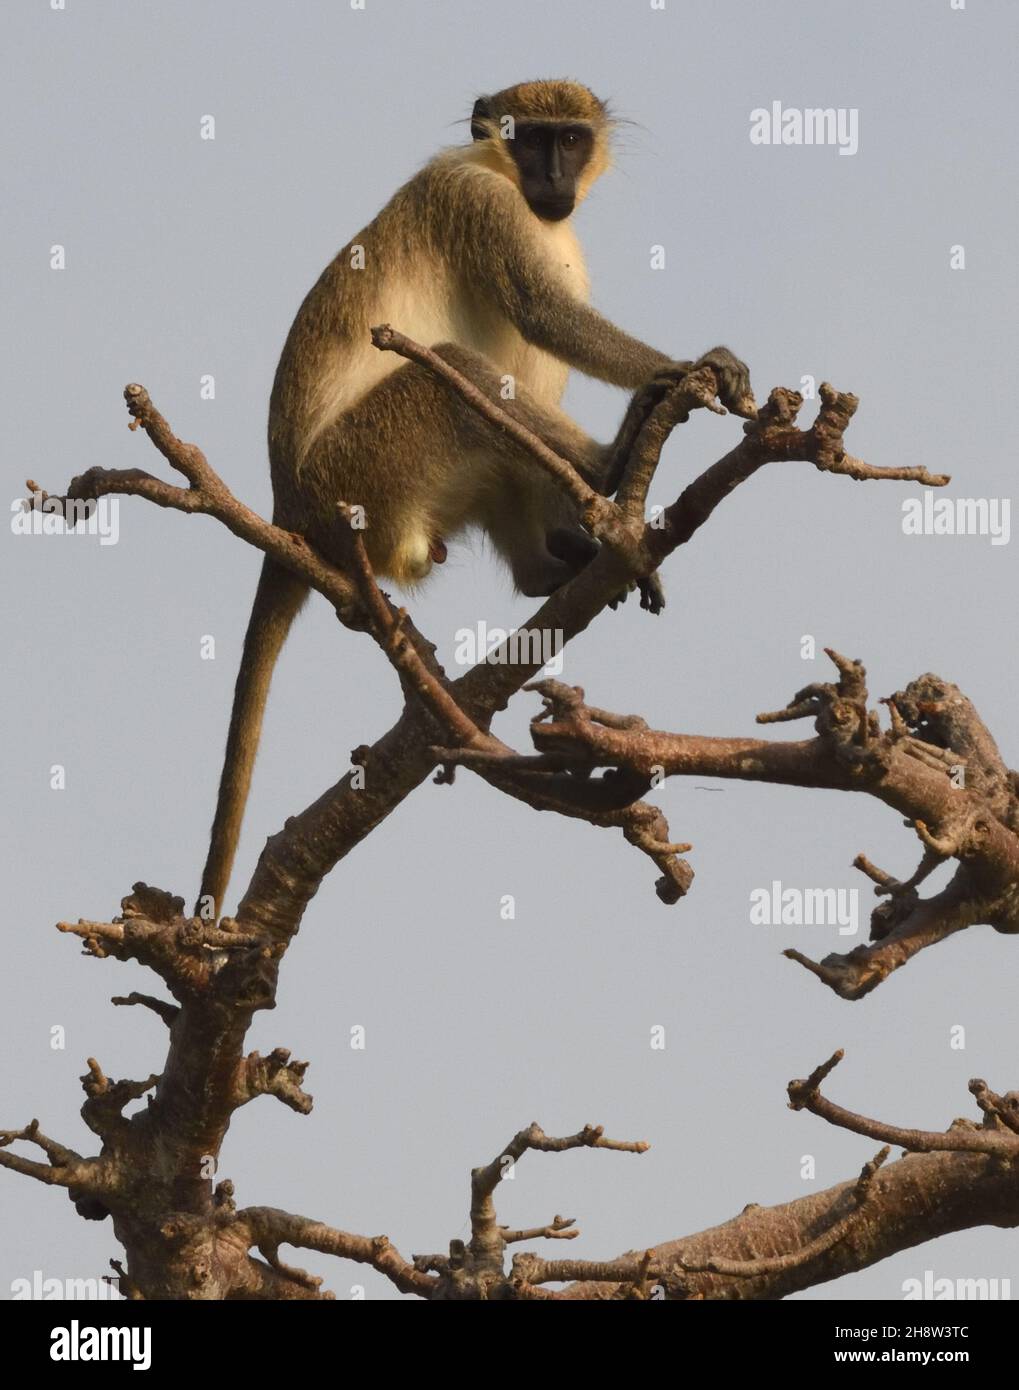 A male  green monkey or callithrix monkey (Chlorocebus sabaeus), also known as the sabaeus monkey sits at the top of a prominent tree Stock Photo